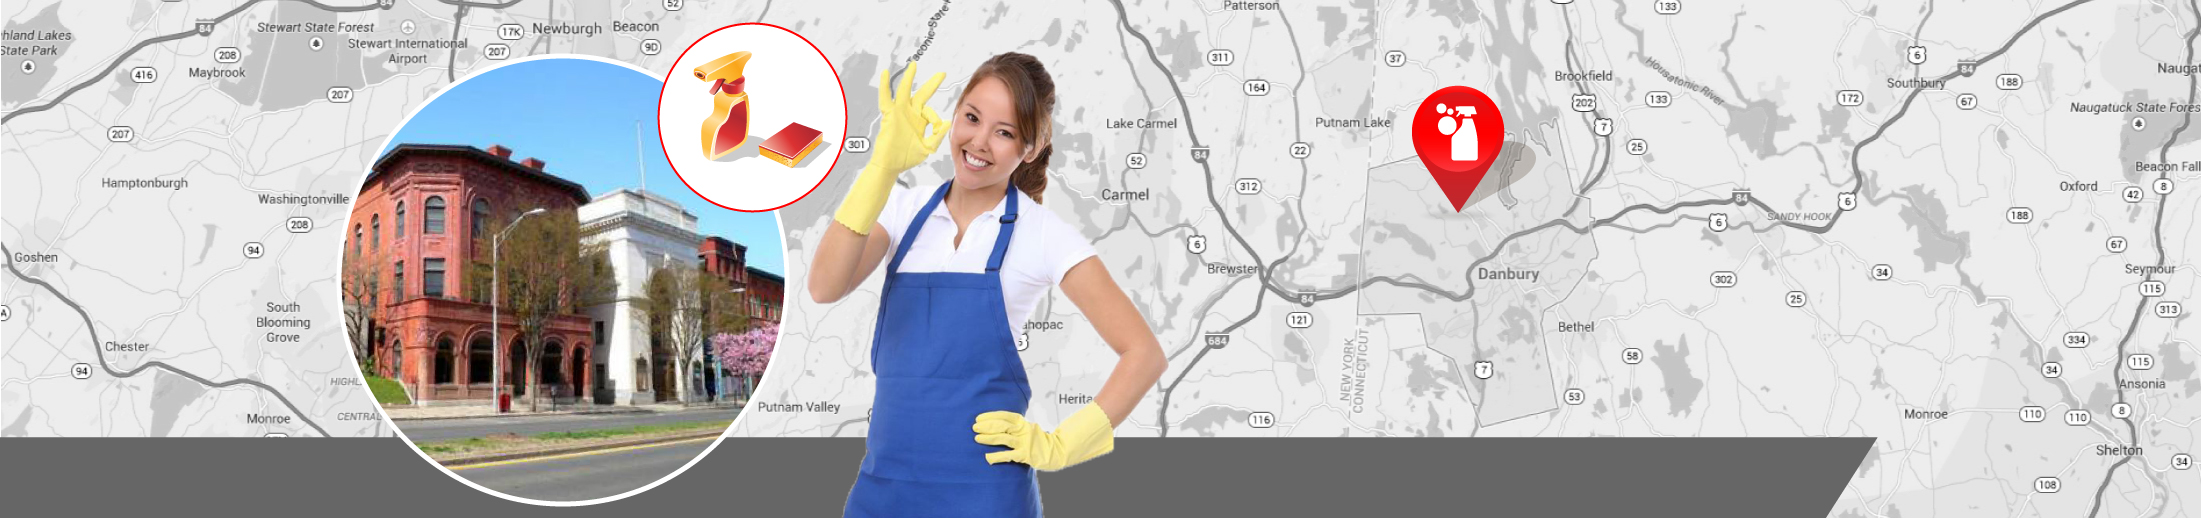 westchester_corporate_cleaning_banner_danbury